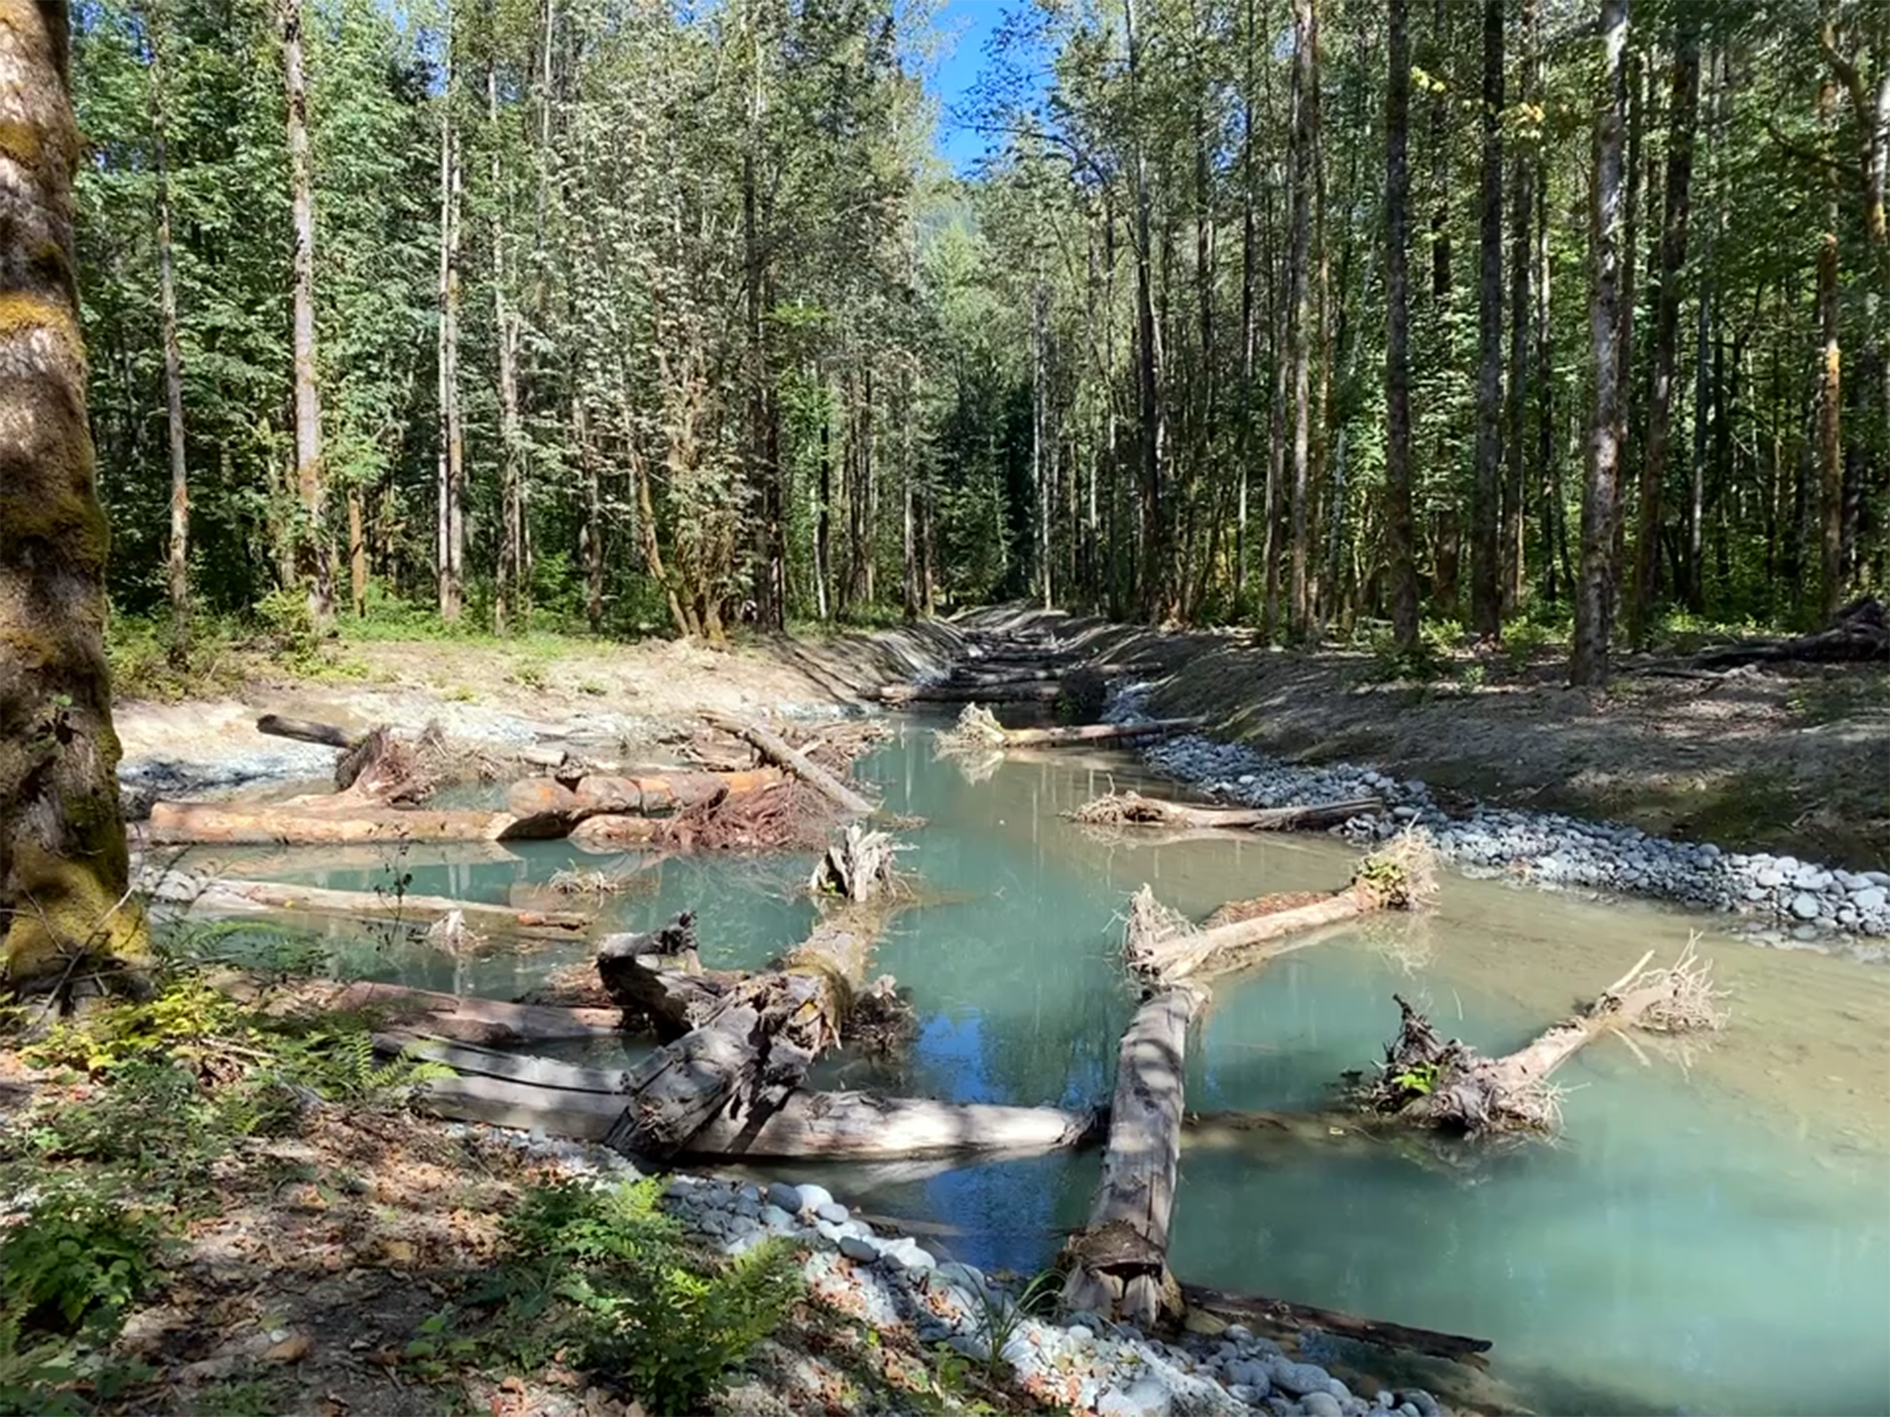  A new, turquoise waterway in a forest that was created to expand salmon spawning habitat